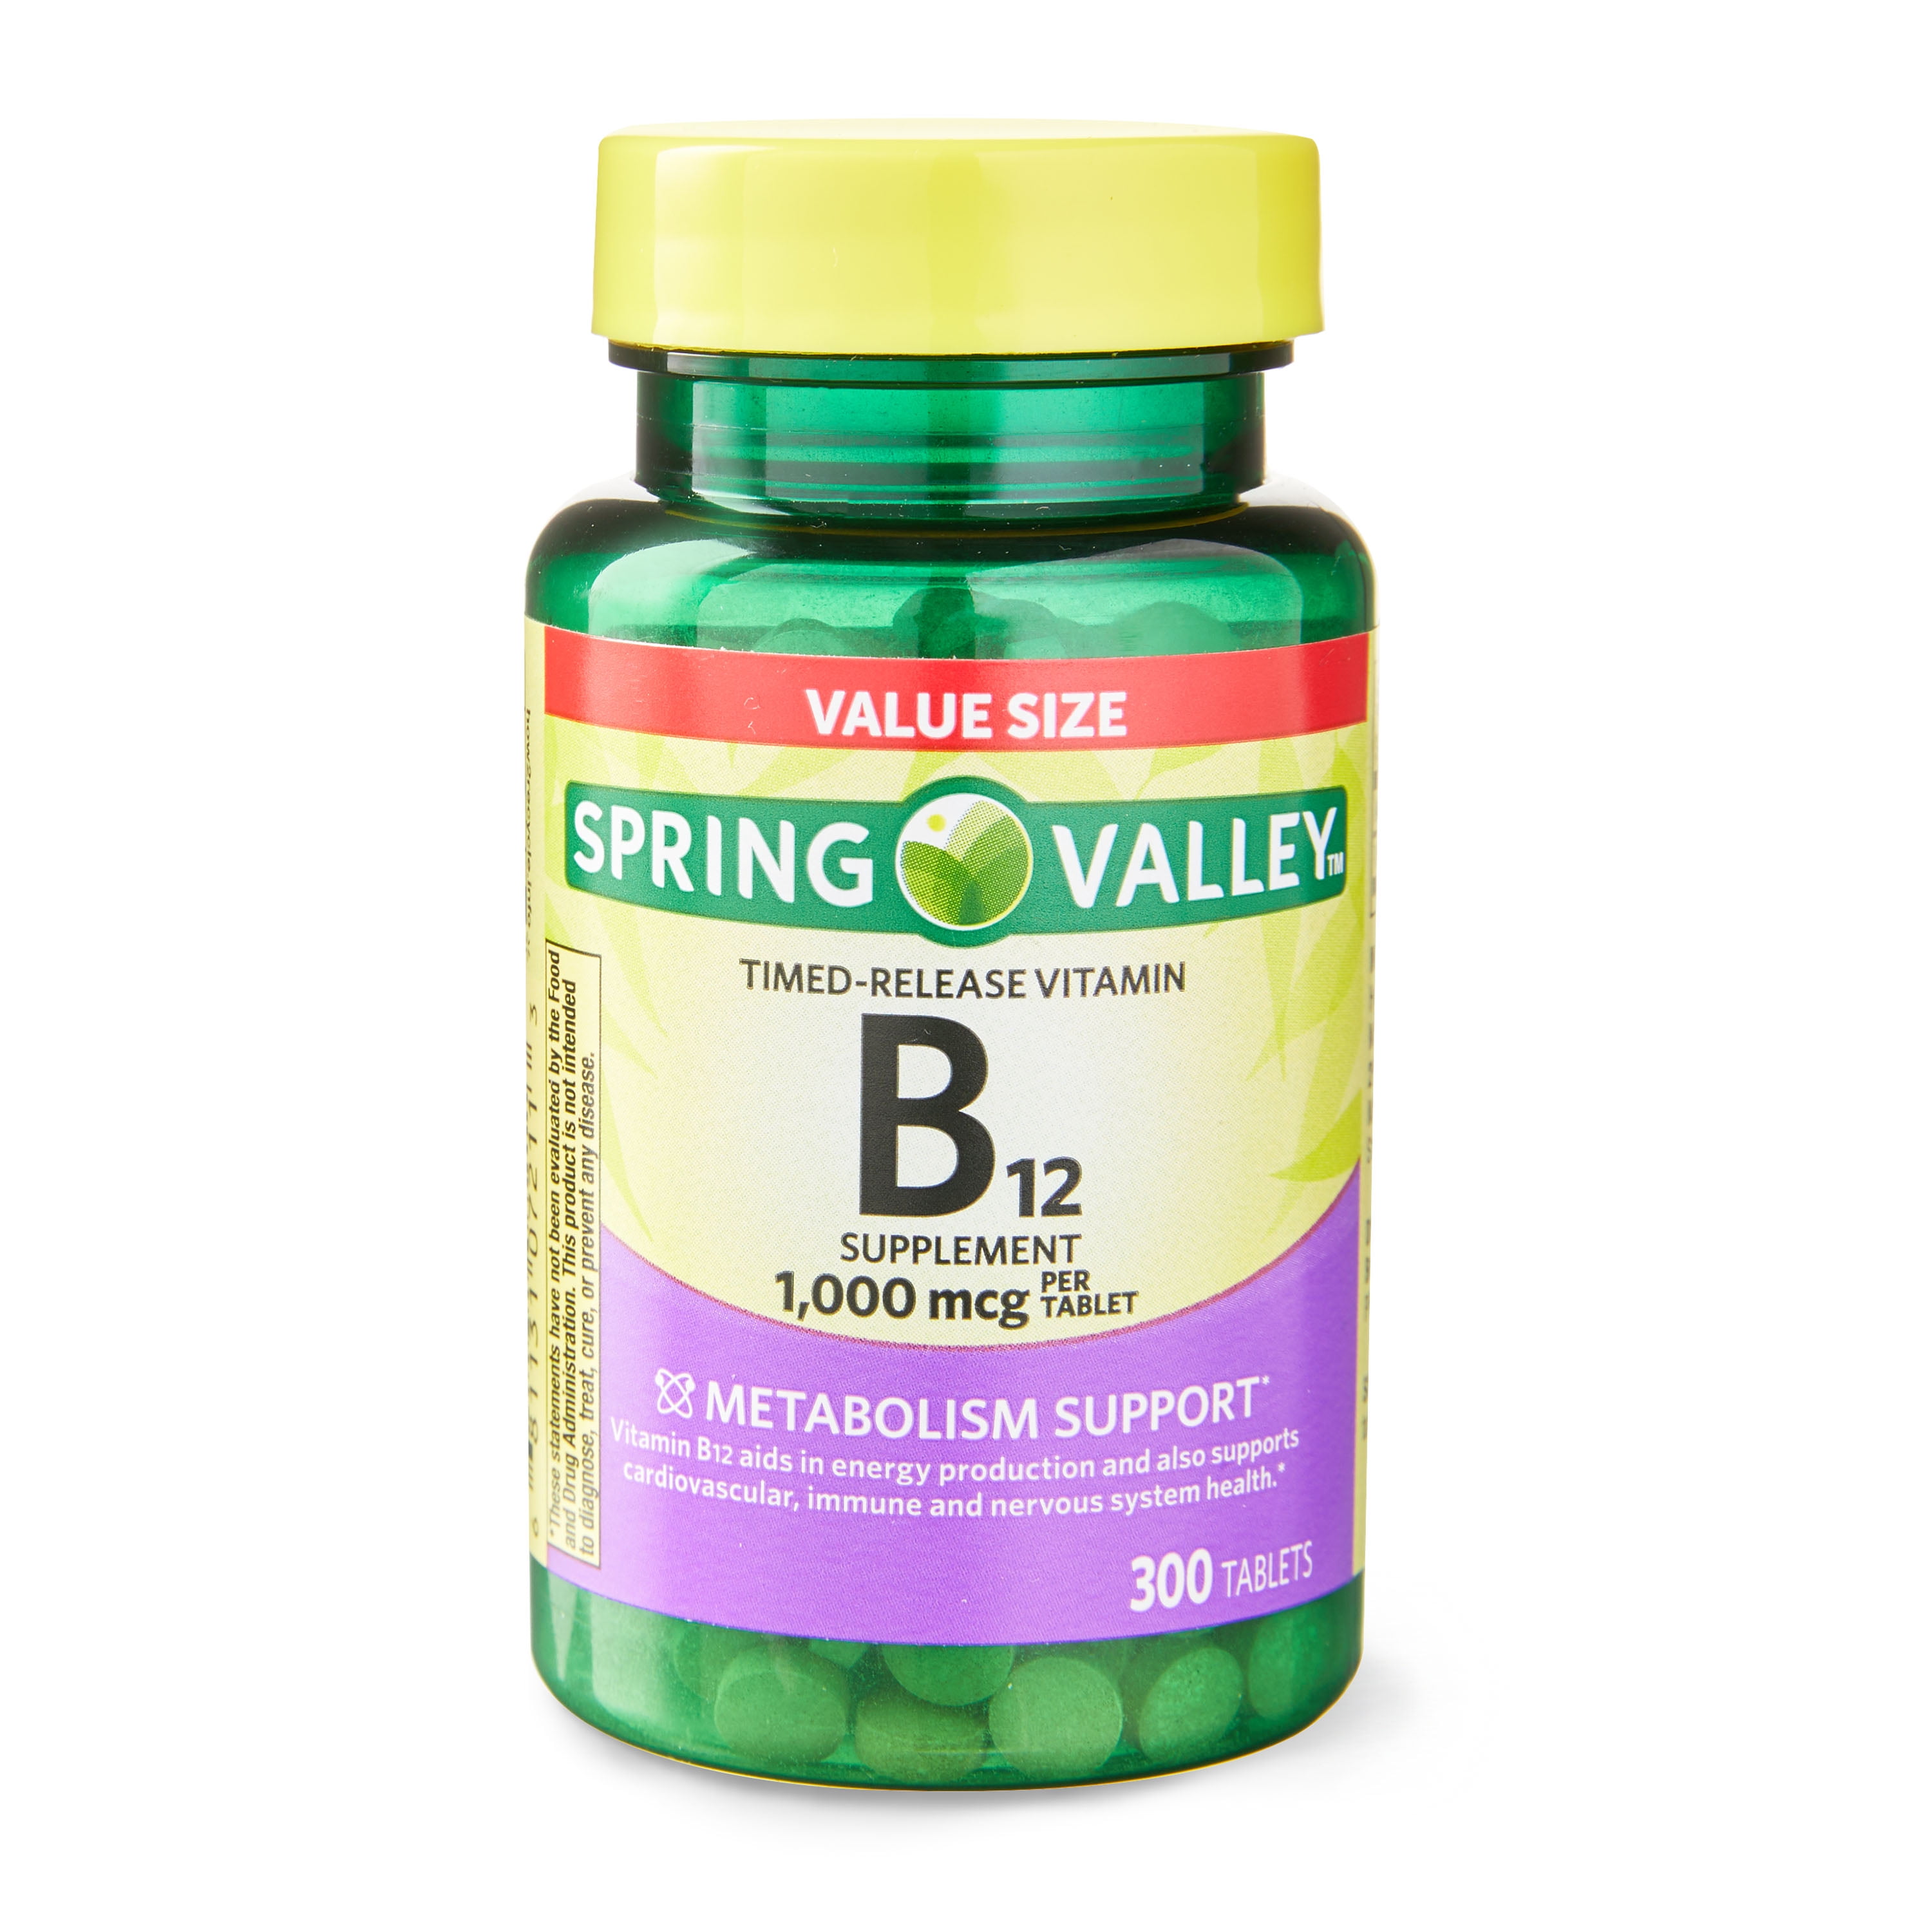 Spring Valley Vitamin B12 Timed-Release Tablets Dietary Supplement Value Size, 1,000 mcg, 300 Count